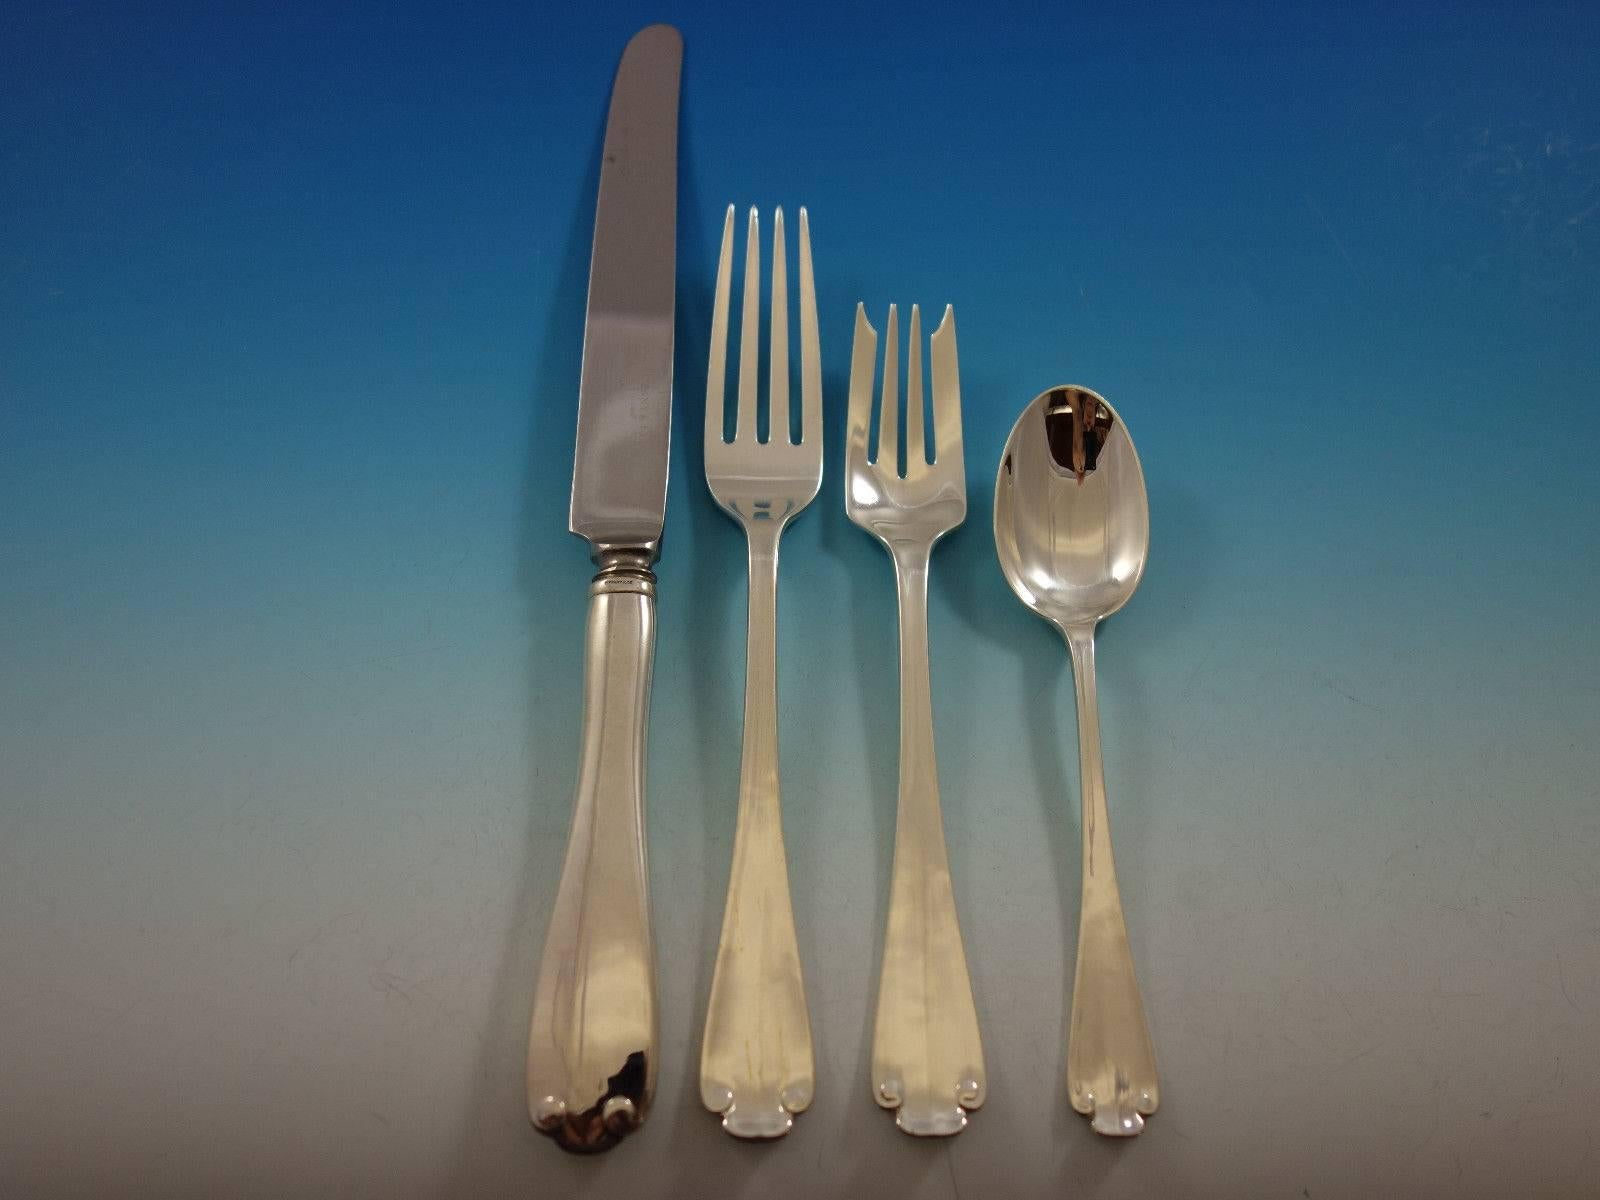 Flemish by Tiffany & Co. sterling silver flatware set, 40 pieces. This set includes: 

eight dinner size knives, 10 1/8